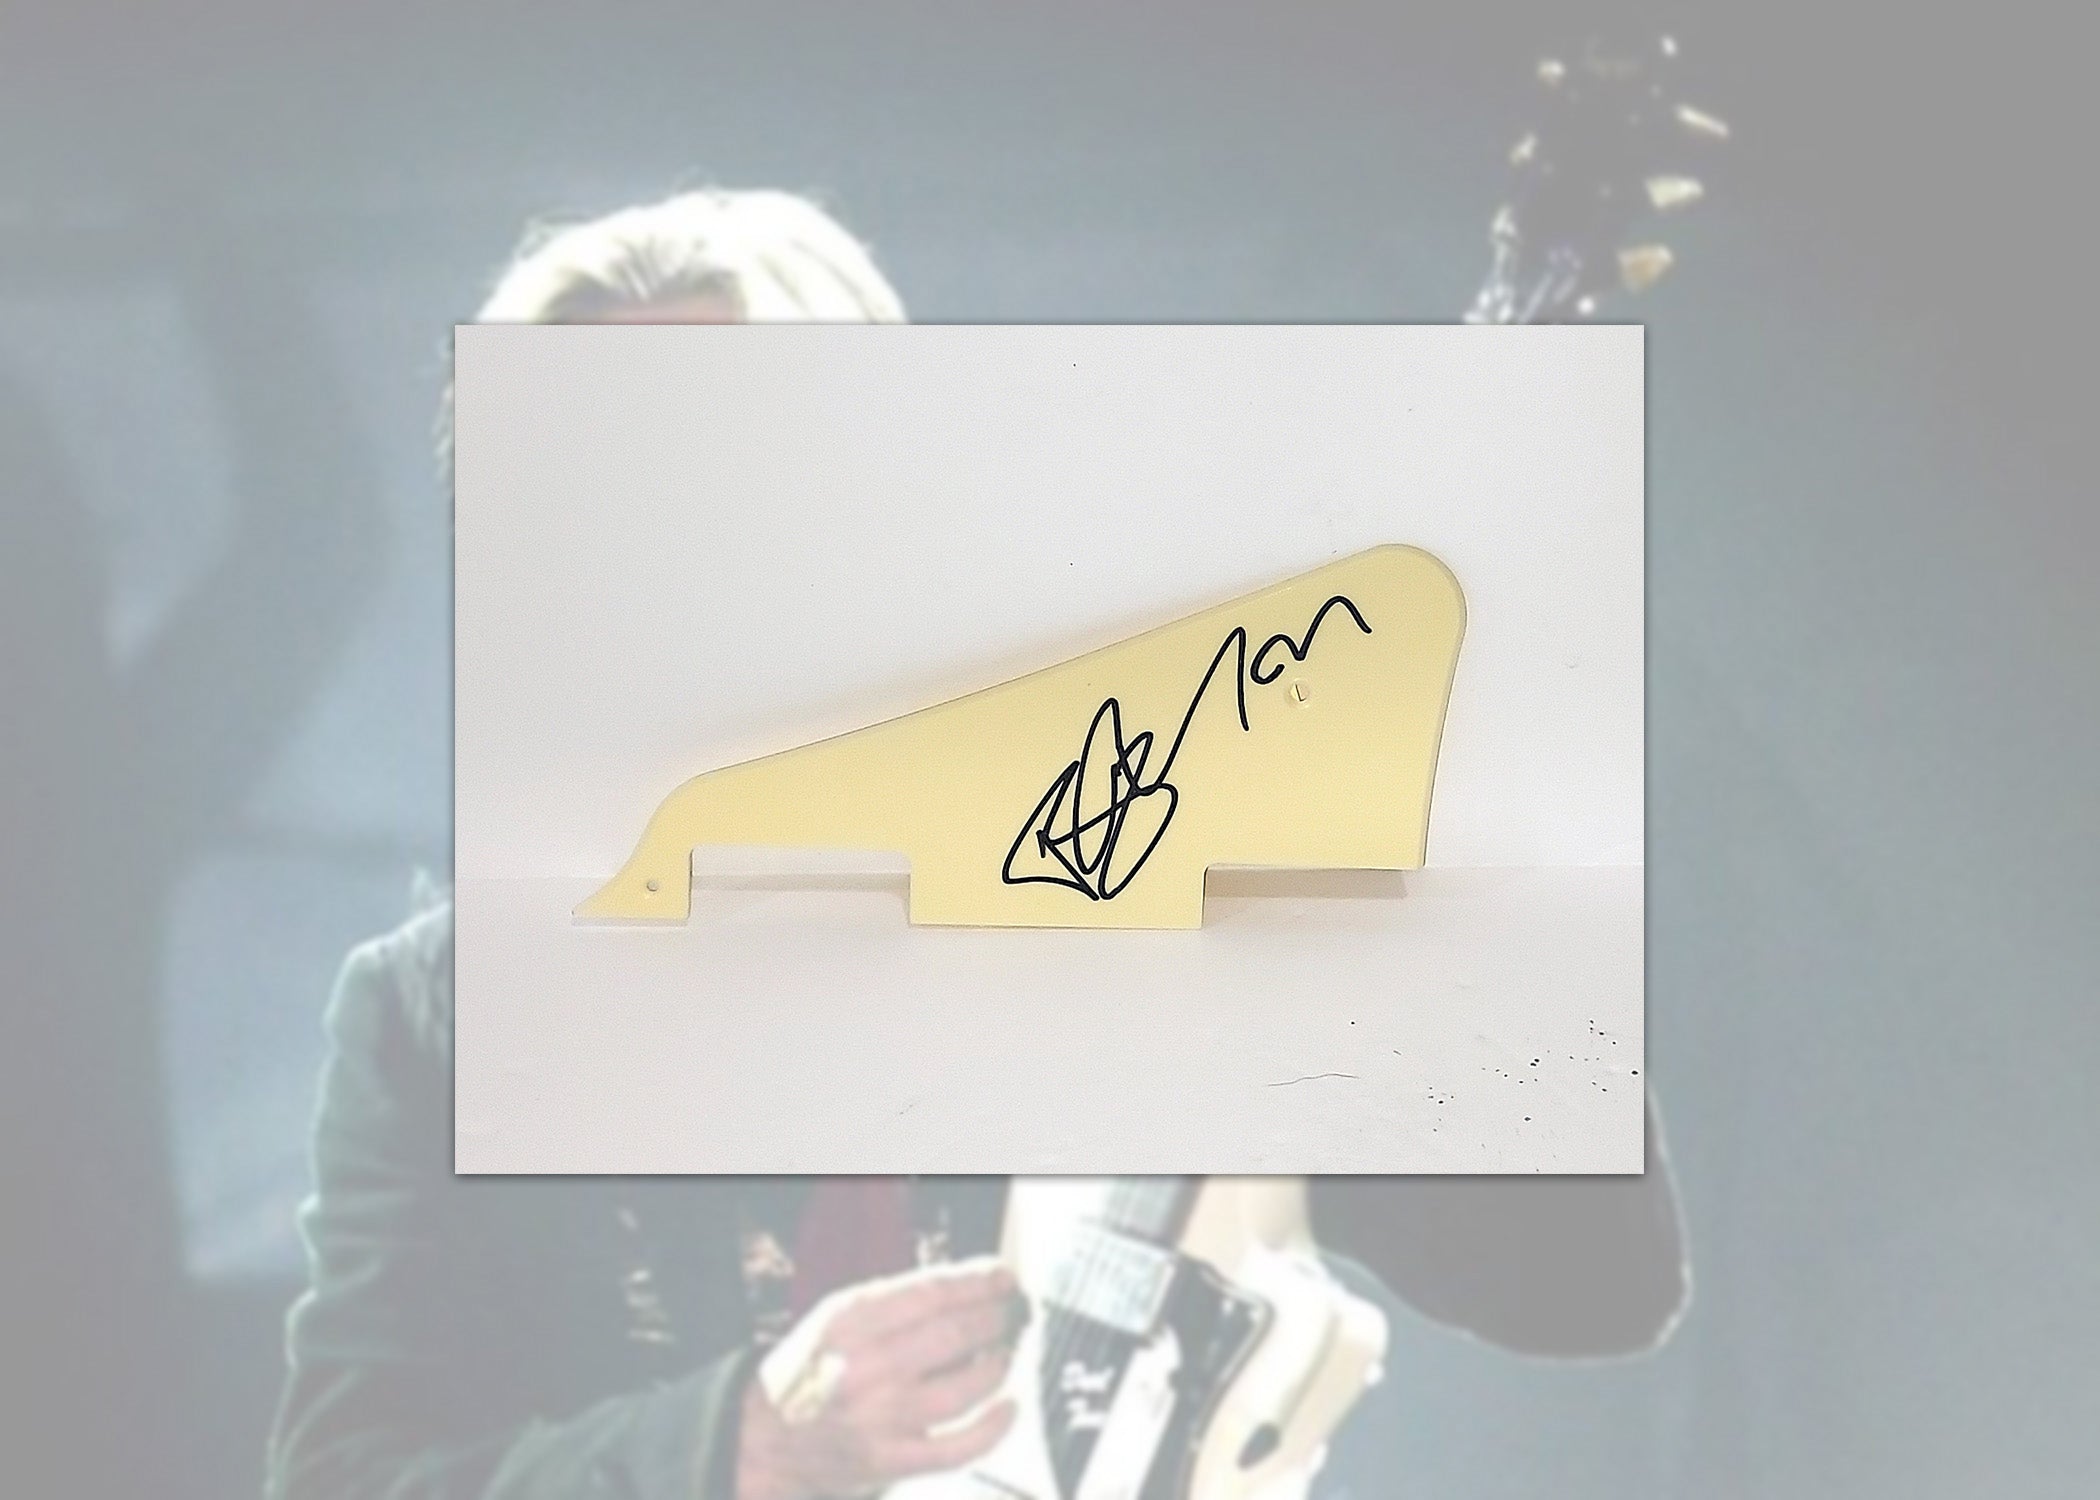 David Bowie Les Paul electric guitar pickguard signed with proof